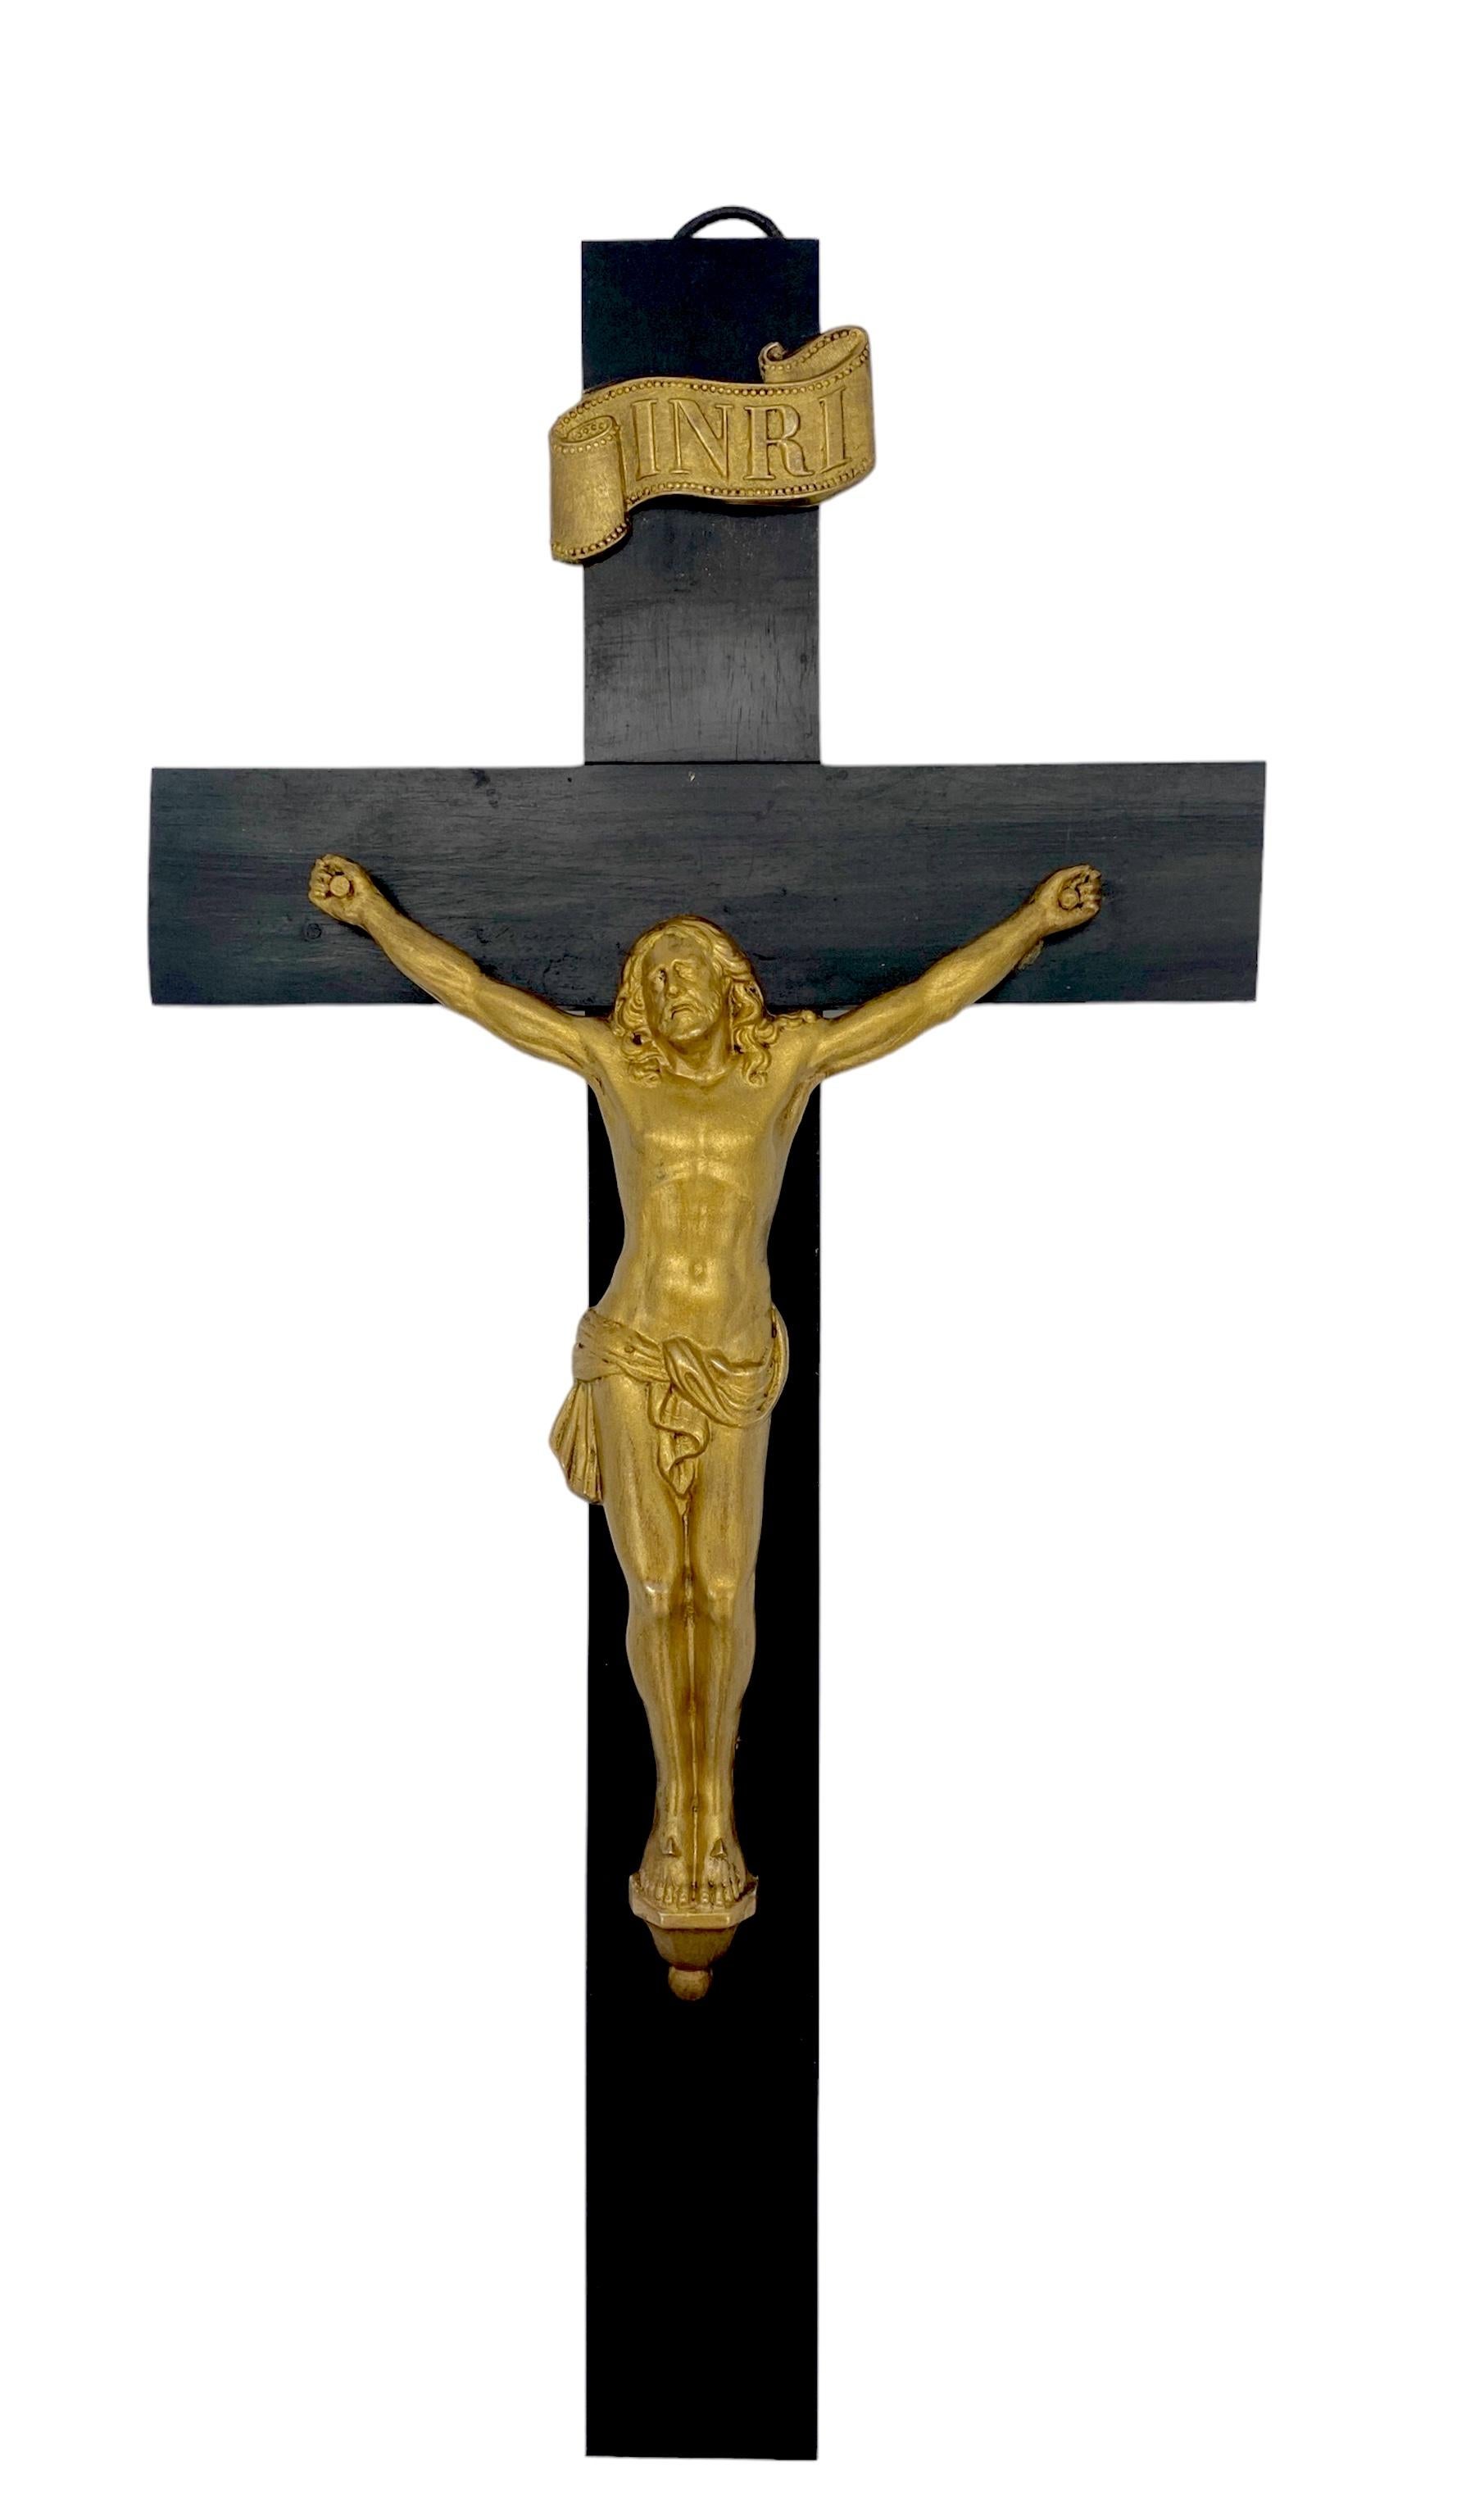 Vintage Italian Ebonized Wood & Gilt Metal Cross/ Crucifix
Italy, Circa 1950s 

A fine Vintage Italian Ebonized Wood & Gilt Metal Crucifix/Cross, made in Italy during the 1950s. This crucifix is of substantial size, measuring 15 inches in height and